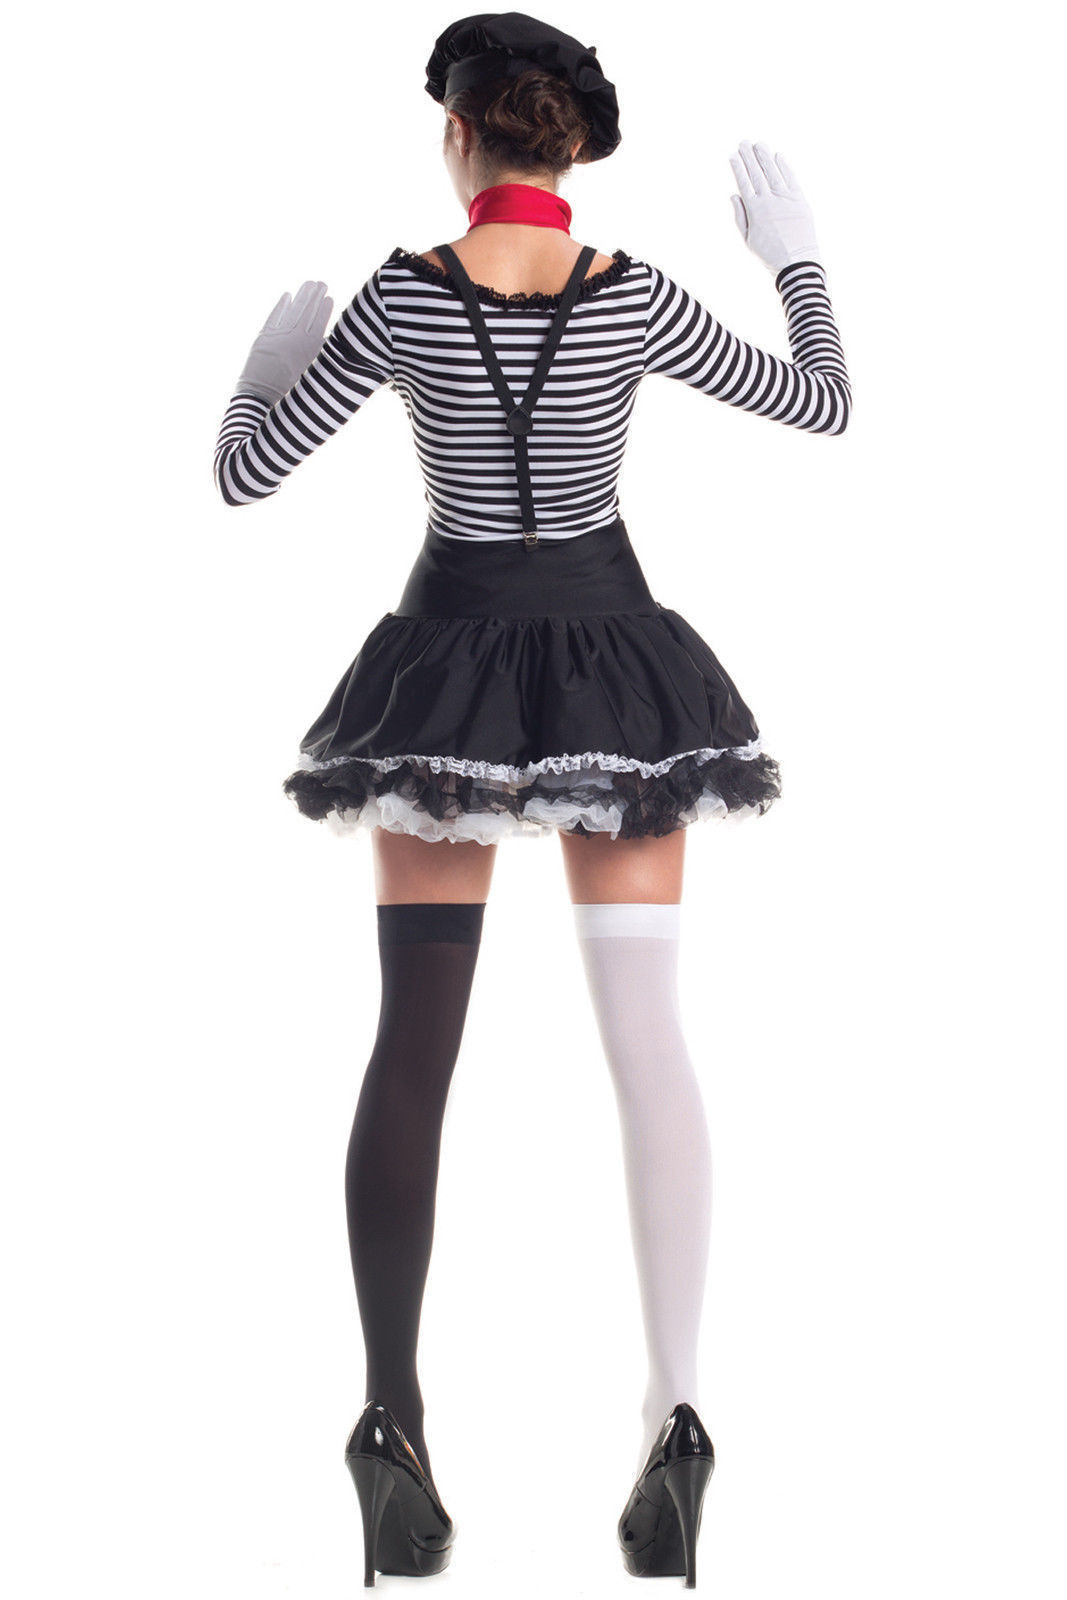 Mermerizing Mime Costume for Adults size Small New by Party King PK222 Cost...